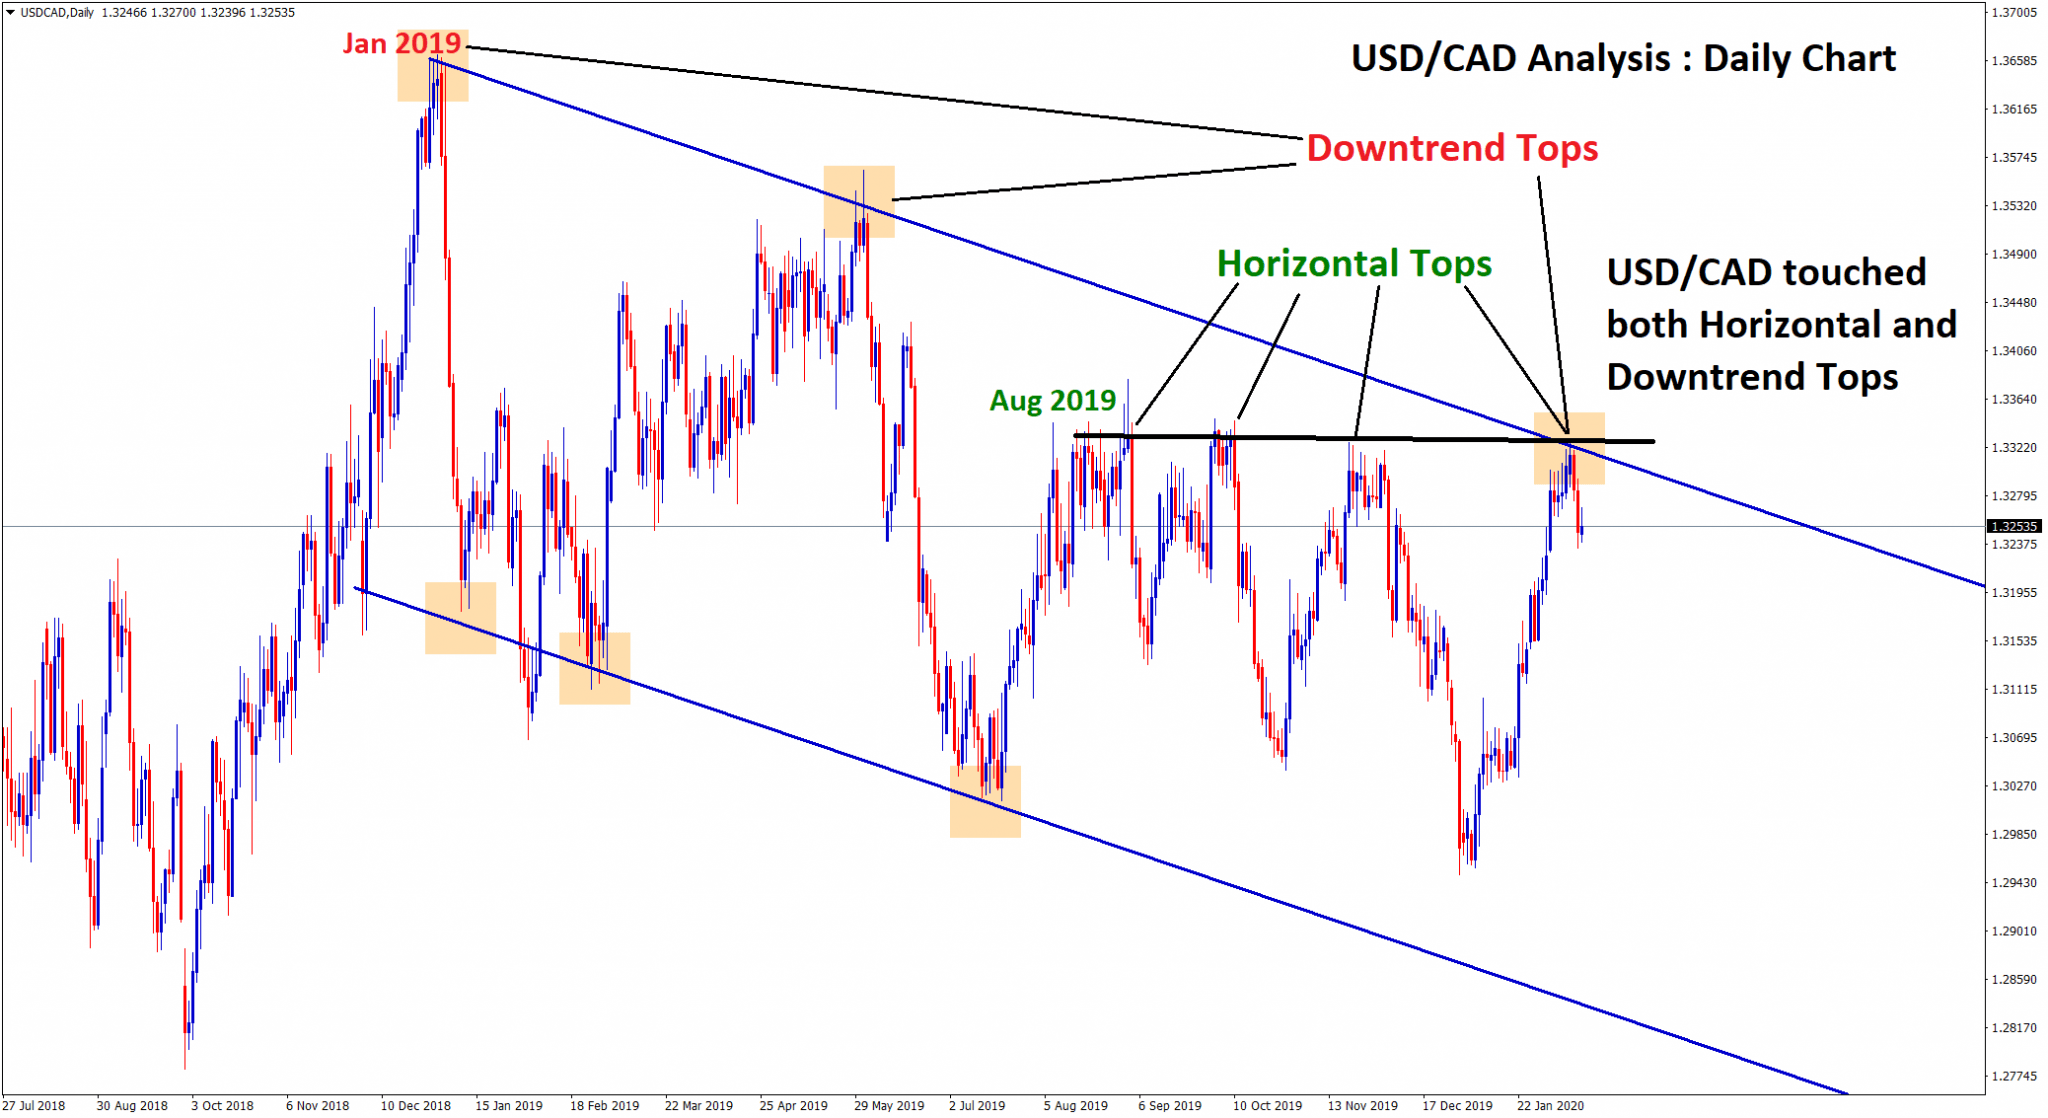 USD CAD downtrend now